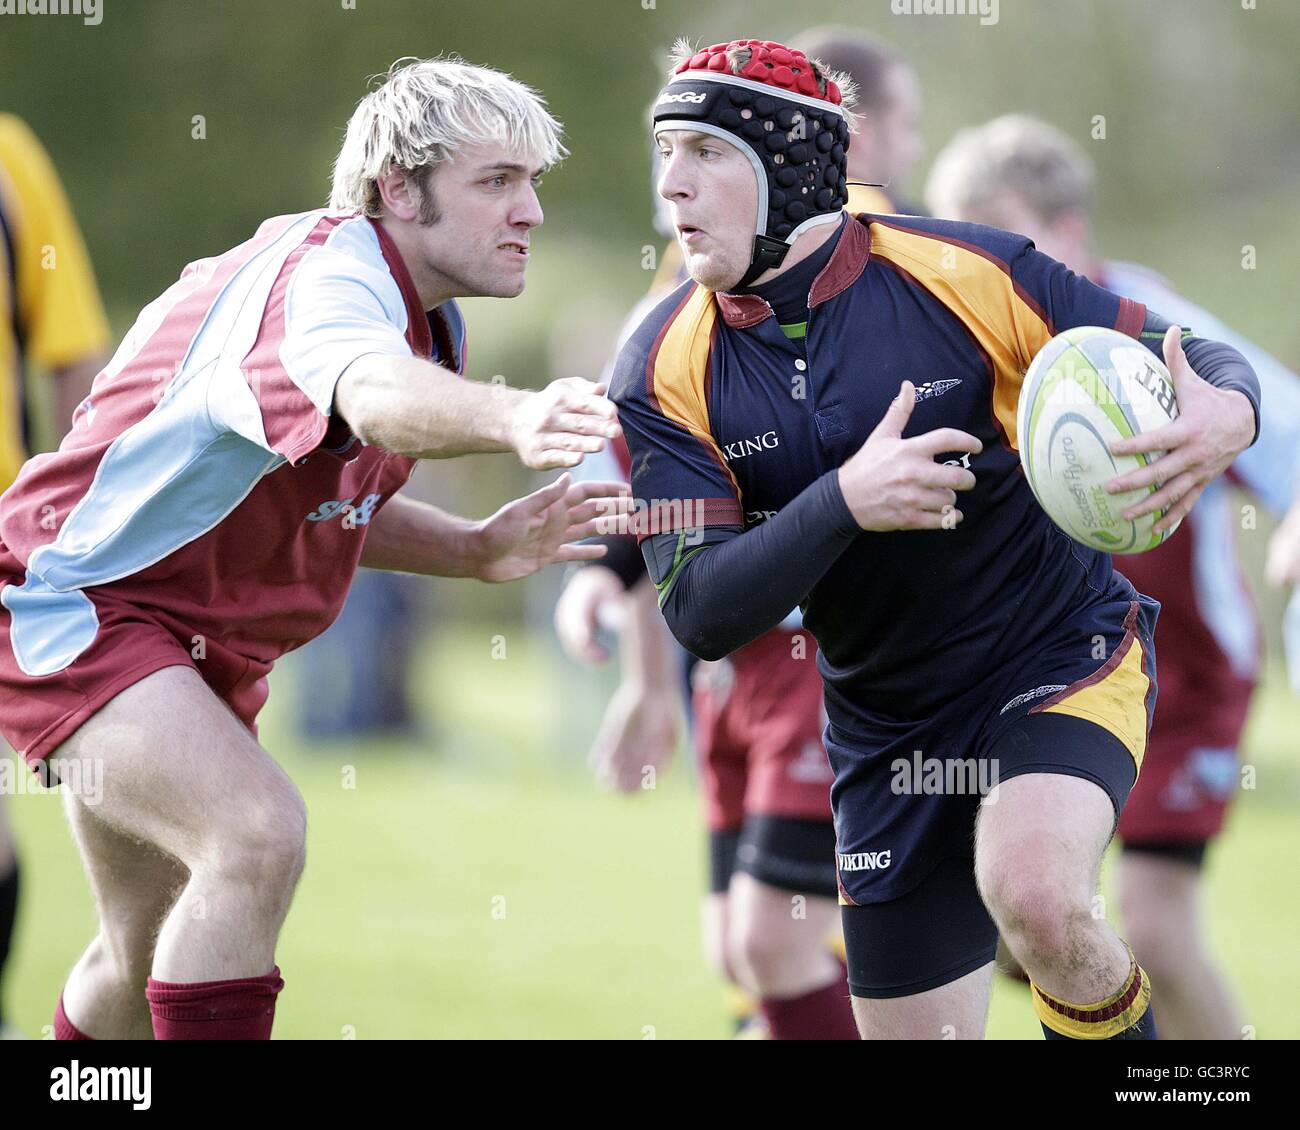 Rugby Union - Scottish Hydro East - St Boswells v Queensferry - St Boswells. St Boswells' Andrew Donaldson (left) tackles Queensferry's Allan Carson Jr in the Scottish Hydro East 2 match at St Boswells, Melrose. Stock Photo